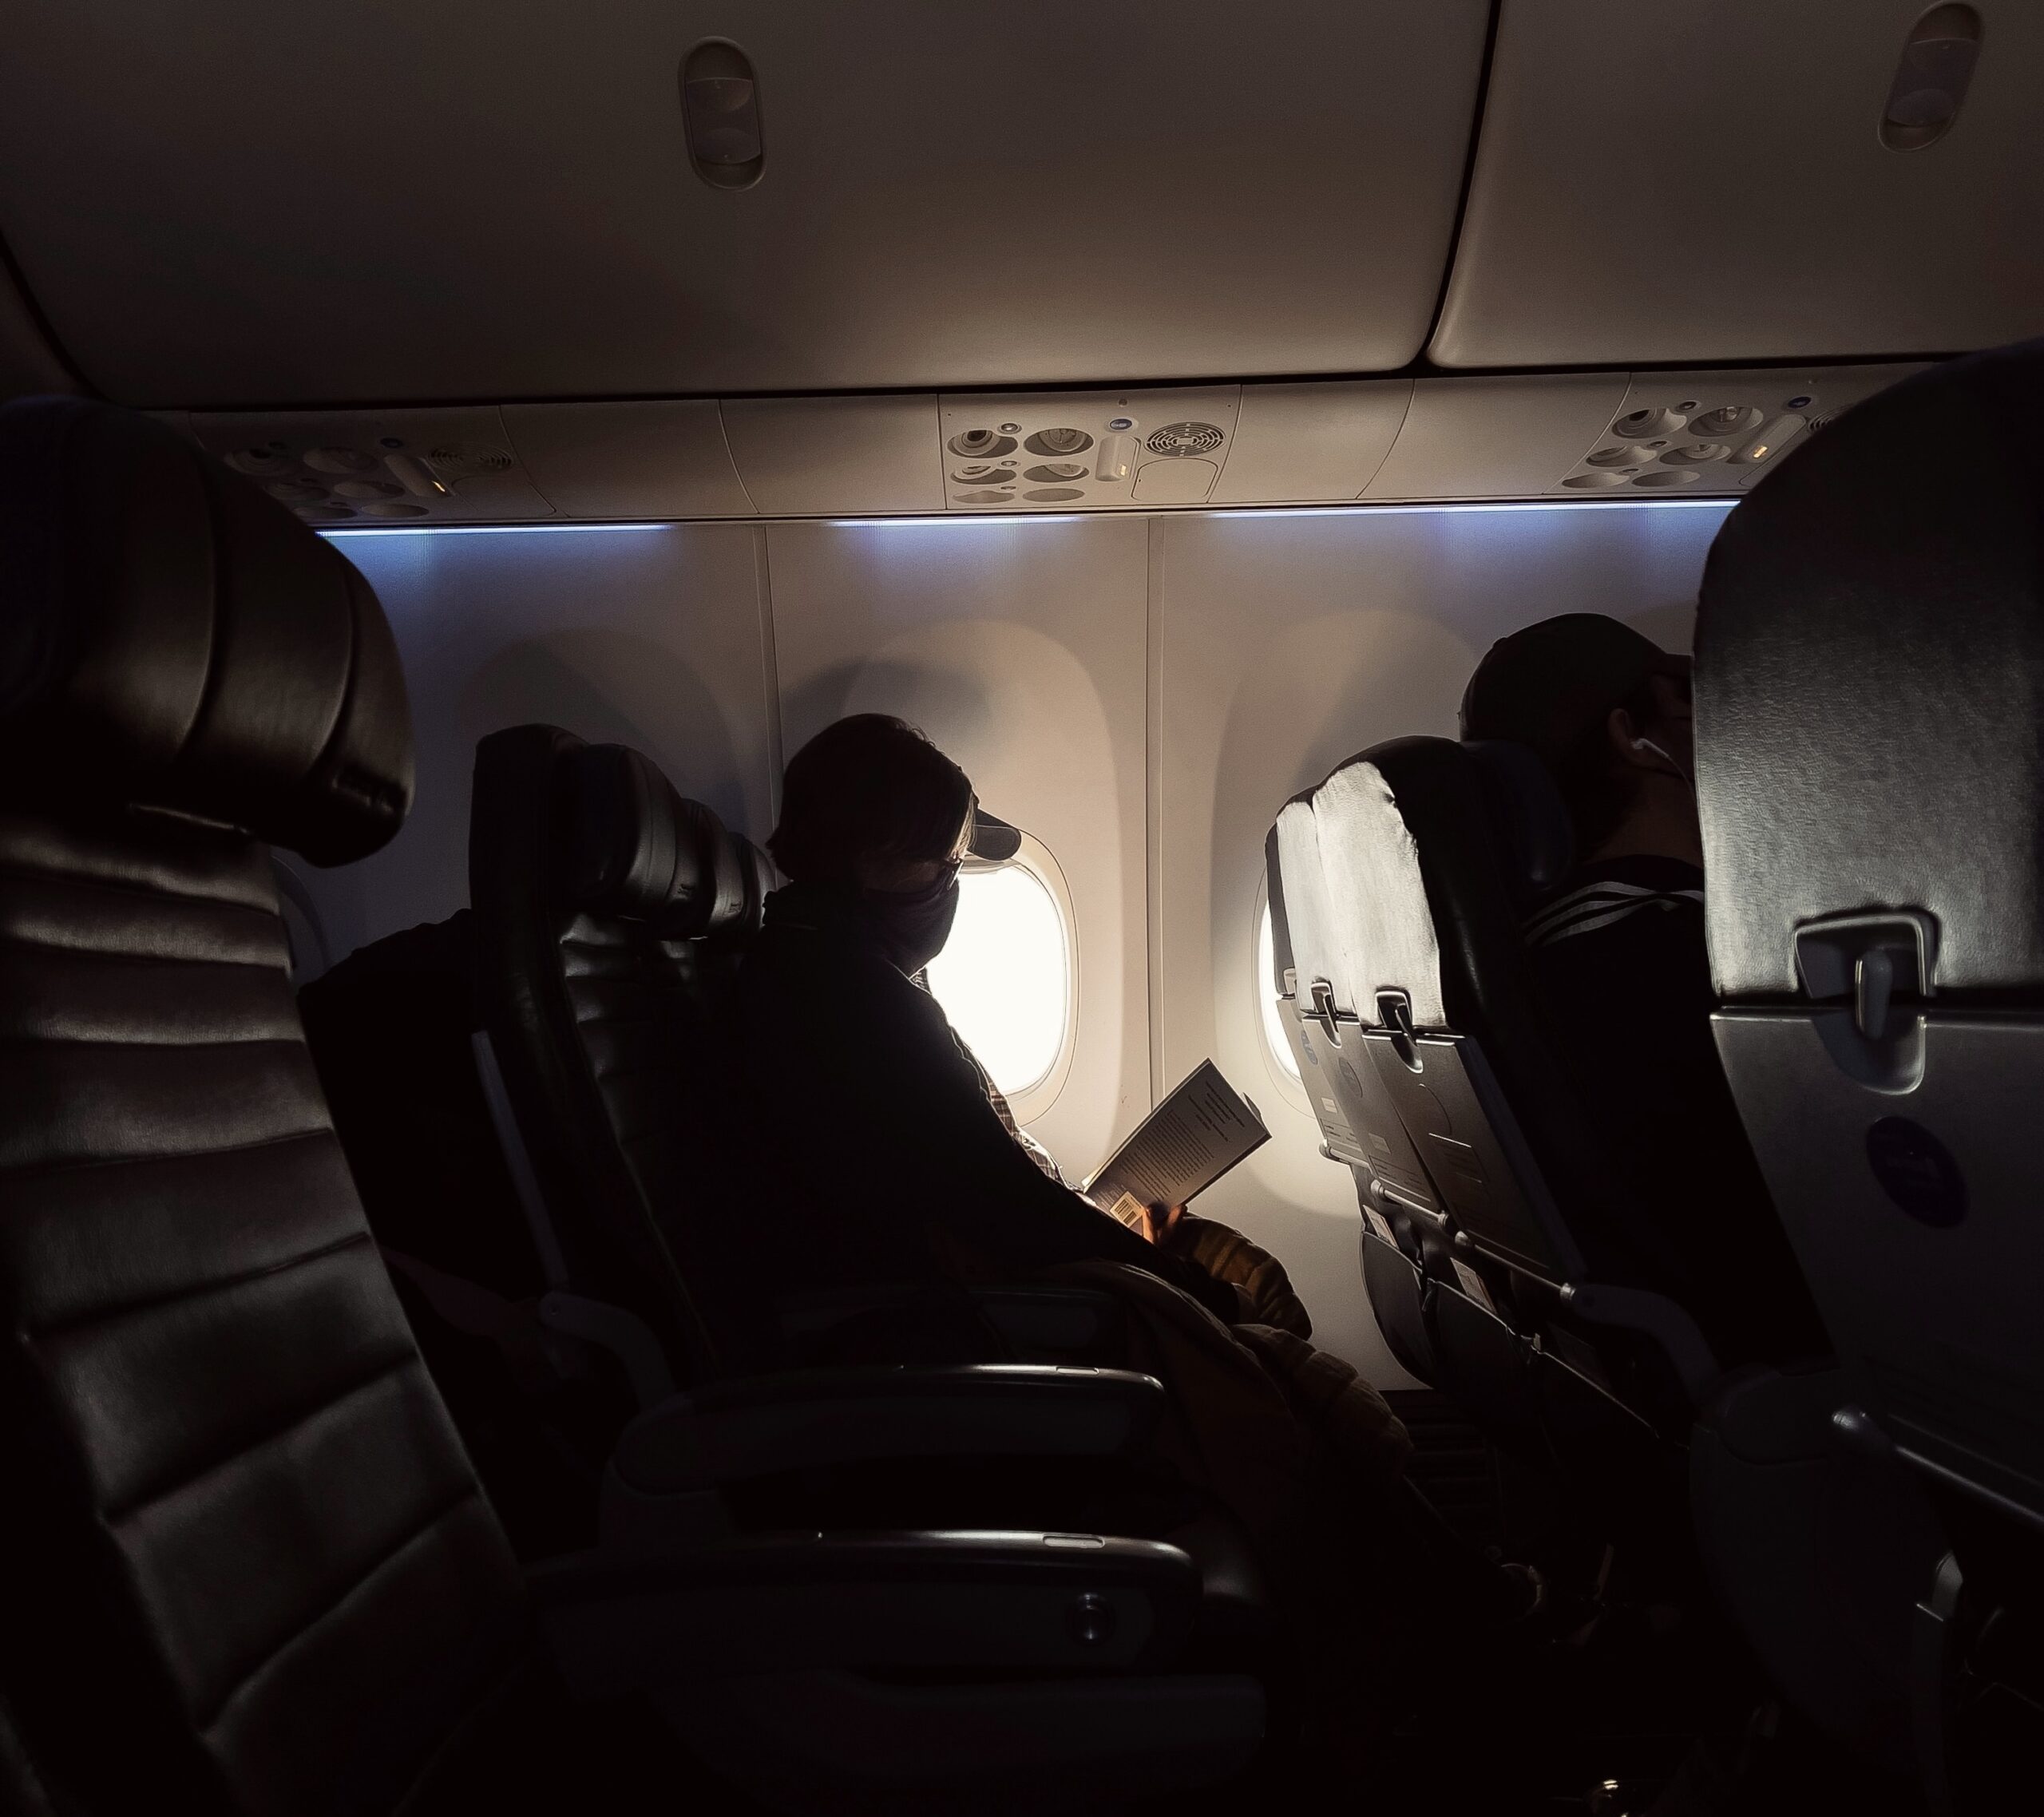 Airlines have had some modern updates to booking and fleets to compete with other airlines. 
Pictured: A man on a dark airplane looking out the bright window with a book in his hand 